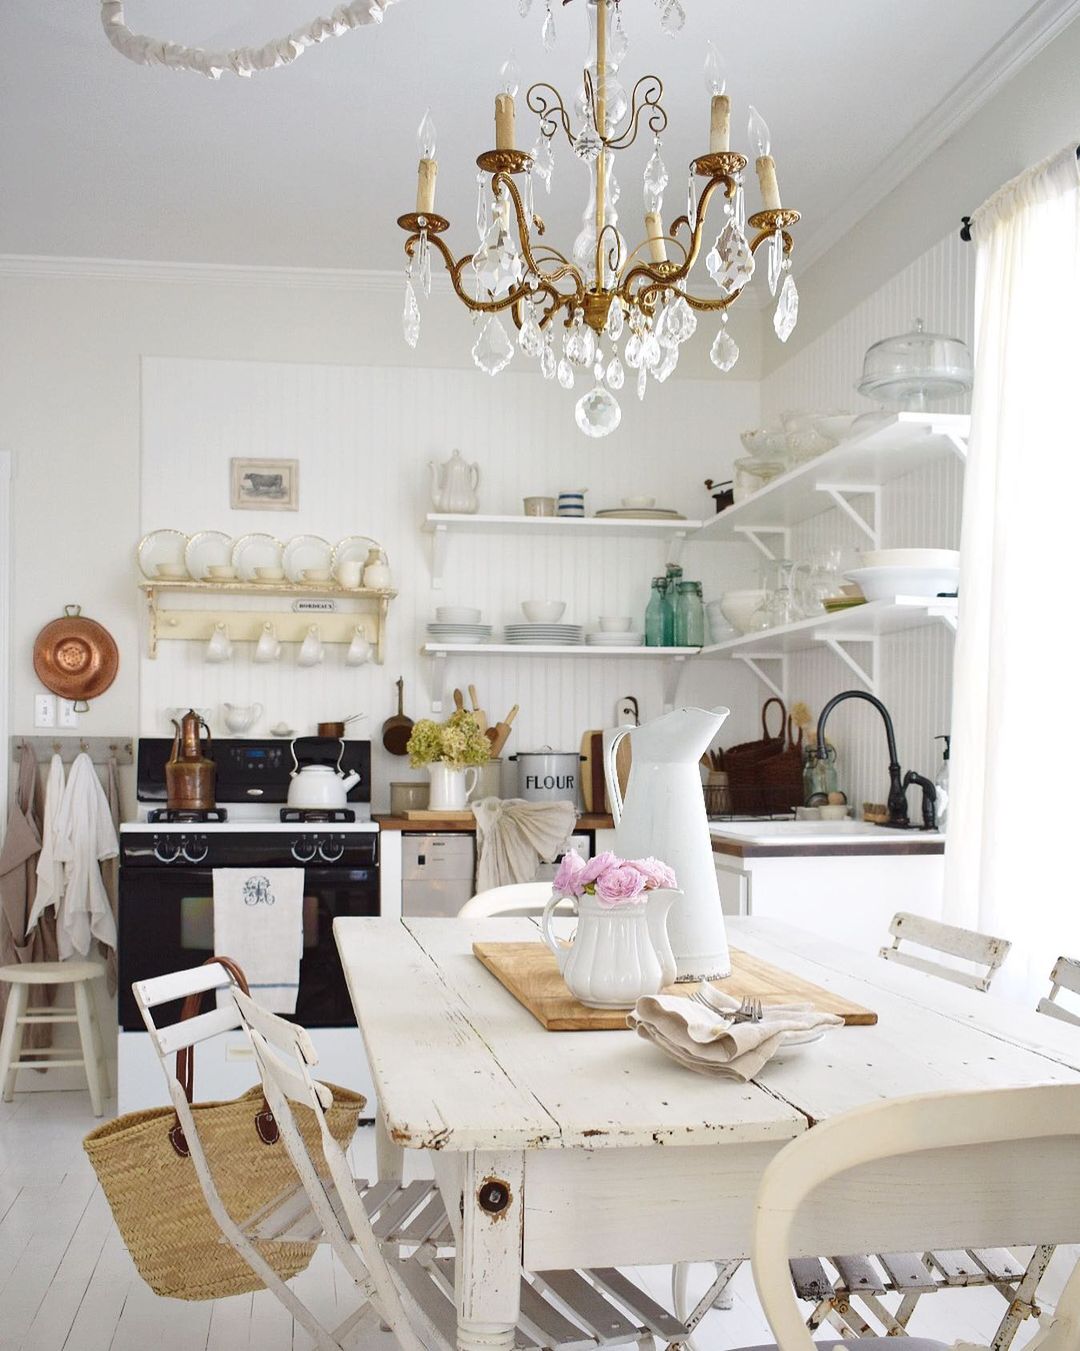 Top 10 Essential Design Elements for a French Country Style Kitchen